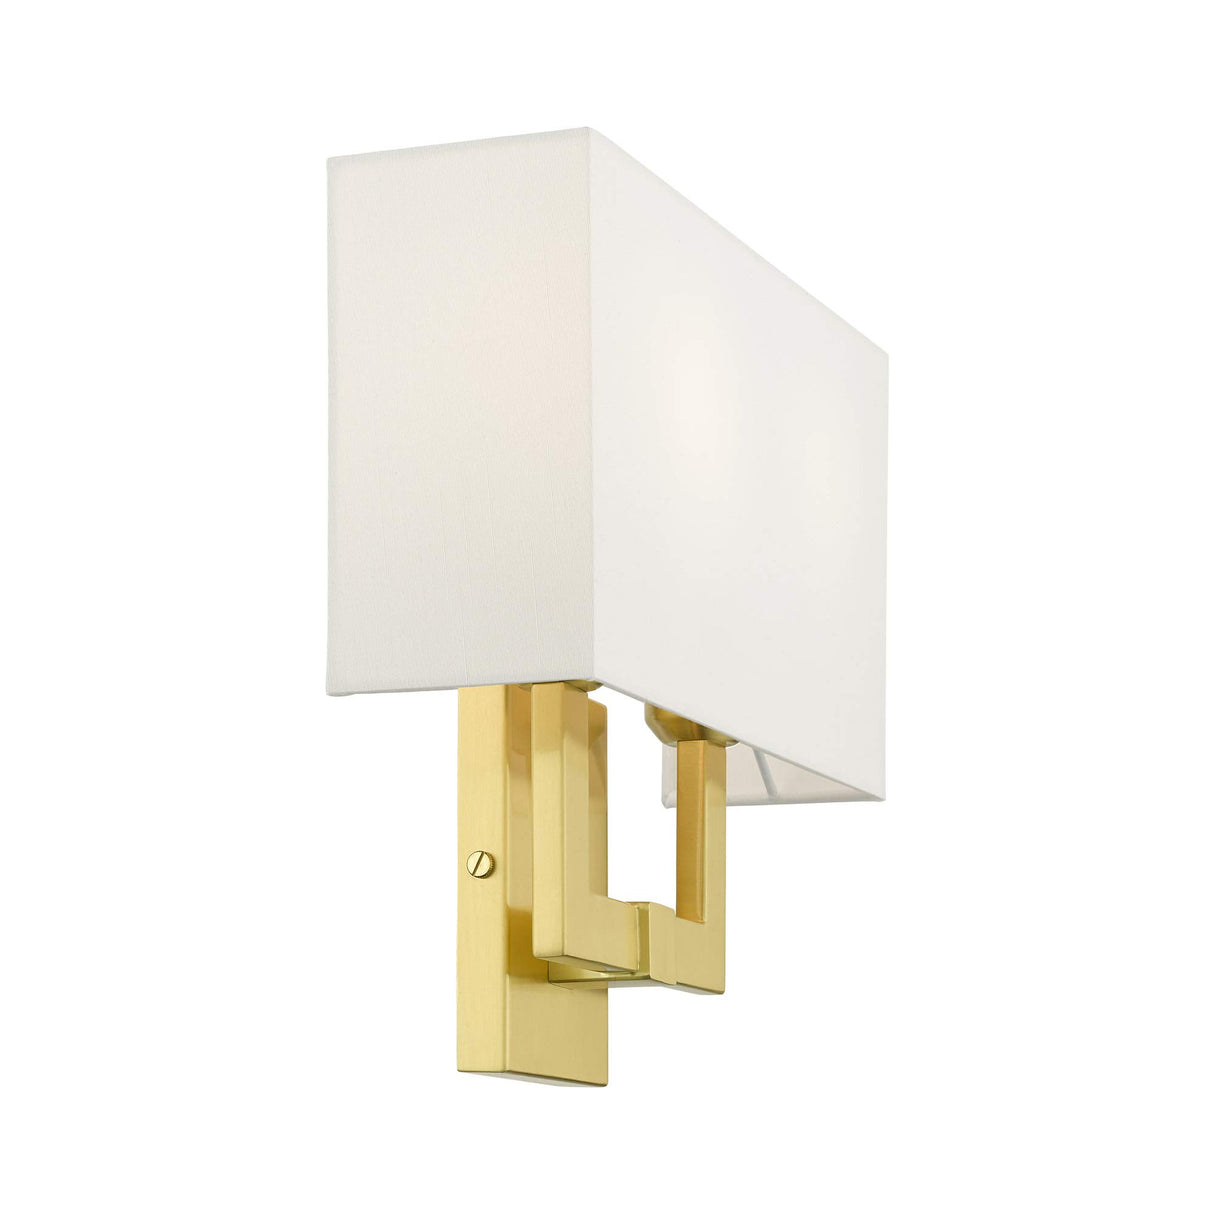 Livex Lighting 51103-07 Transitional Two Light Wall Sconce from Hollborn Collection in Bronze/Dark Finish